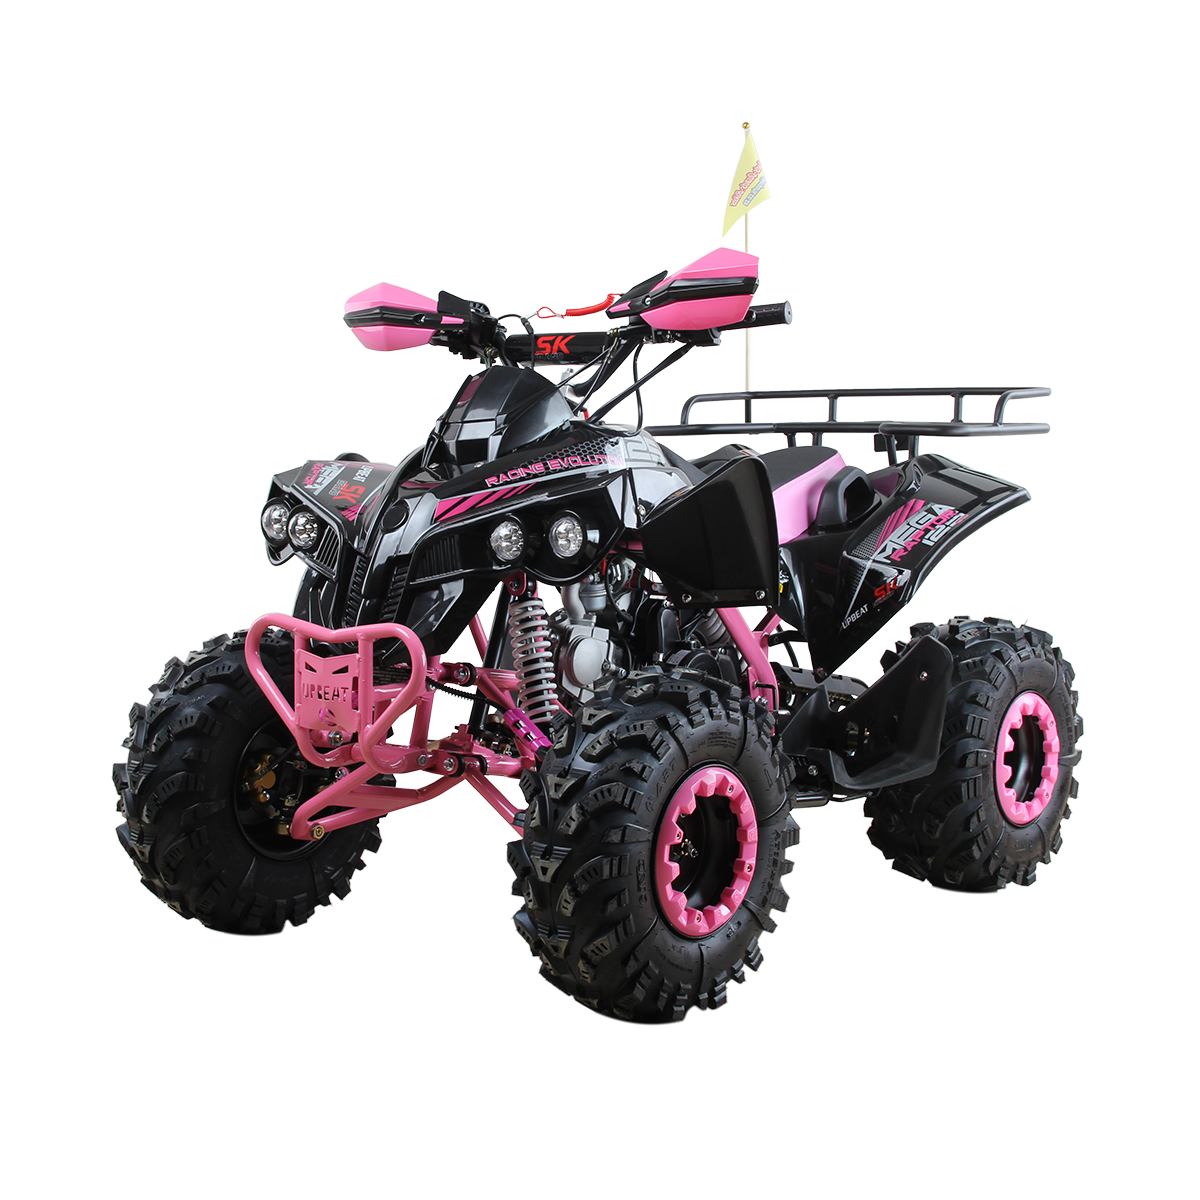 125cc Limited Edition Pink Quad Bike with Rear Rack ...